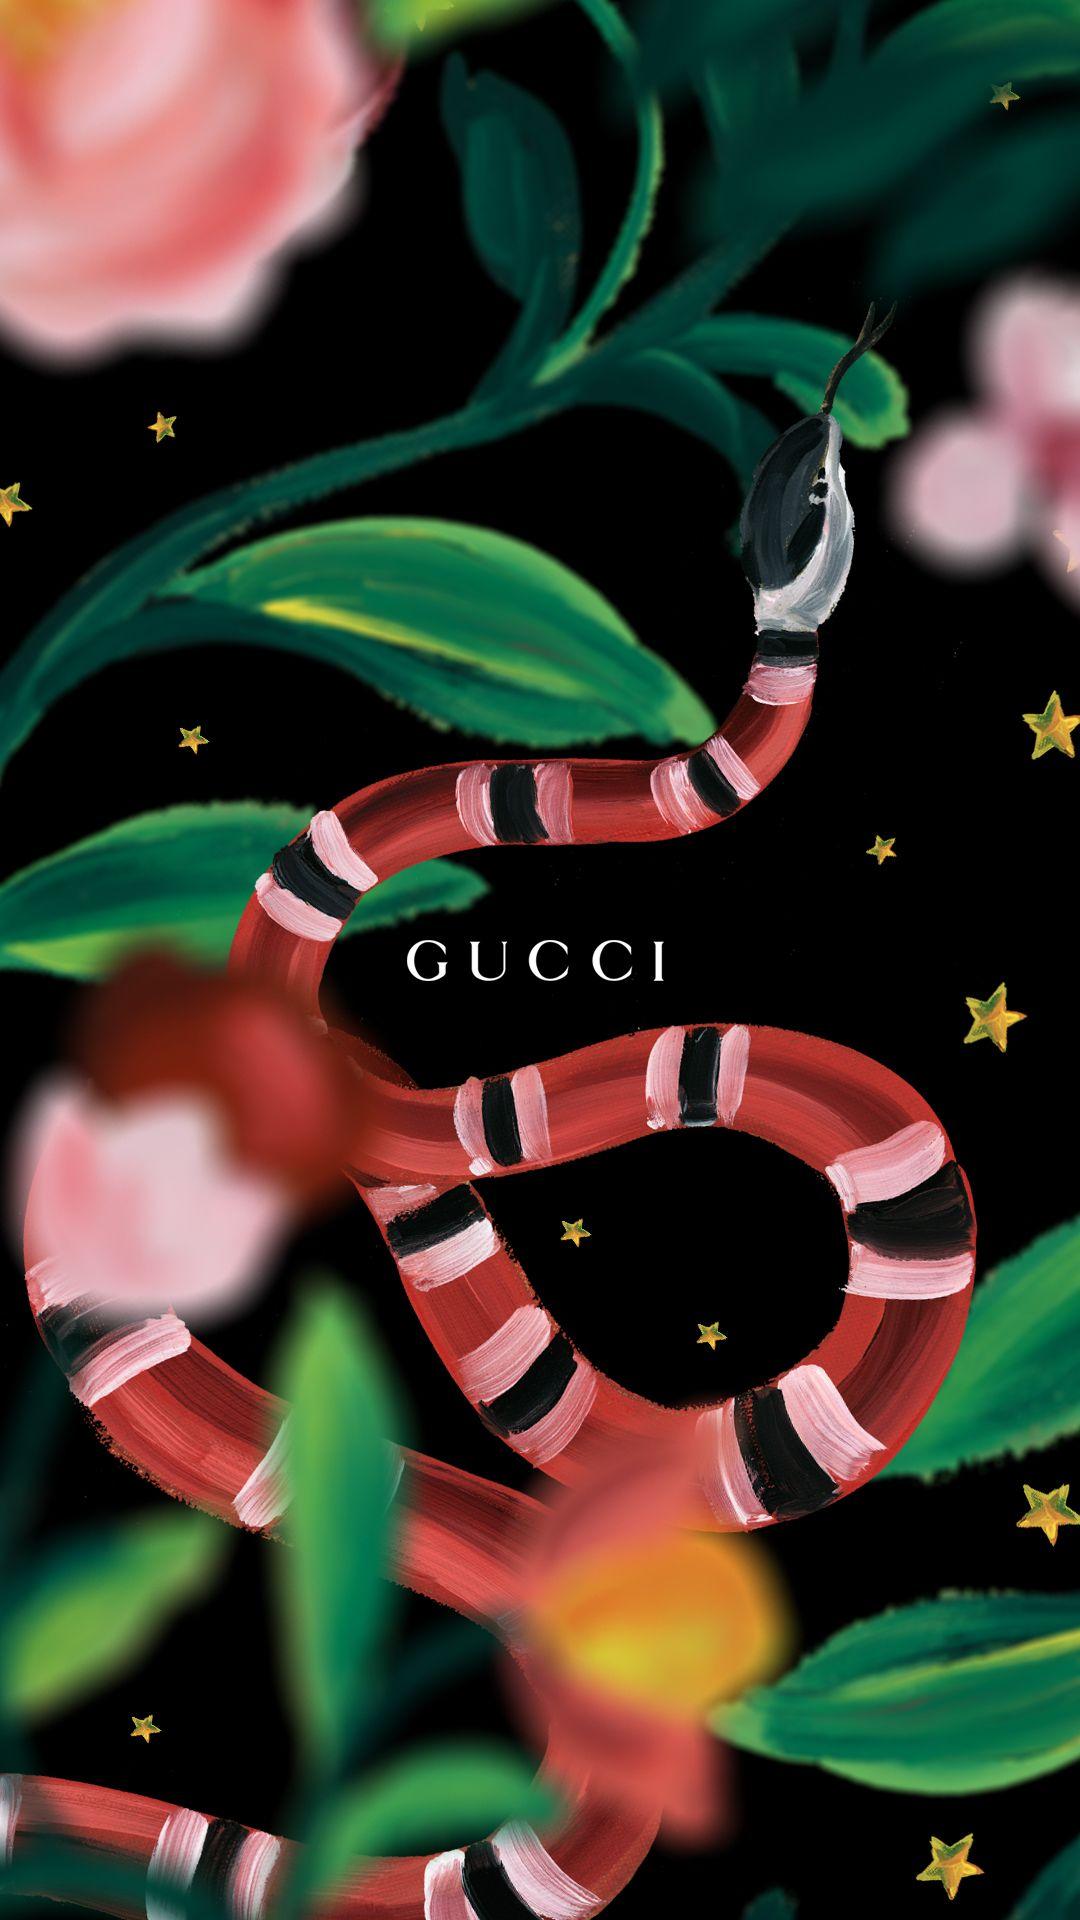 Gucci Iphone Wallpapers Top Free Gucci Iphone Backgrounds